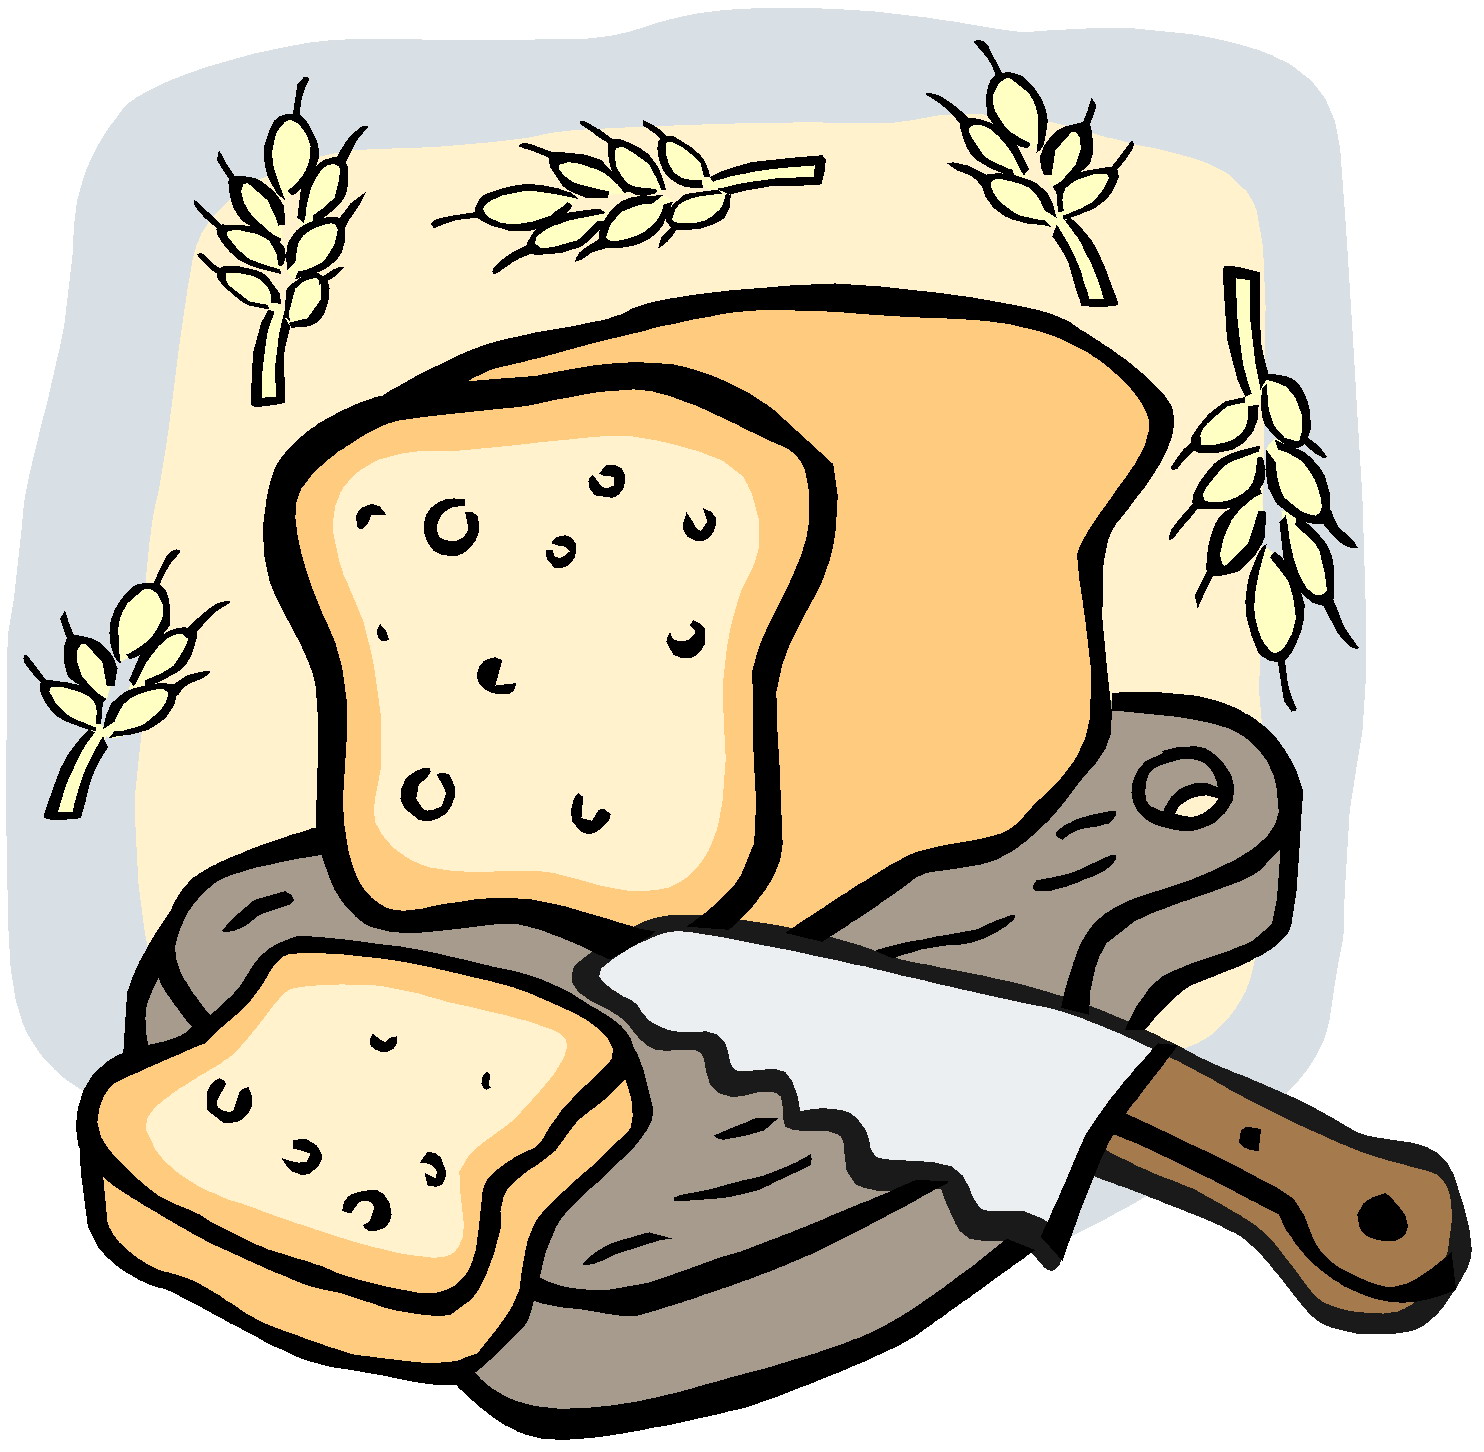 Bread clip art bread images image 7 wikiclipart